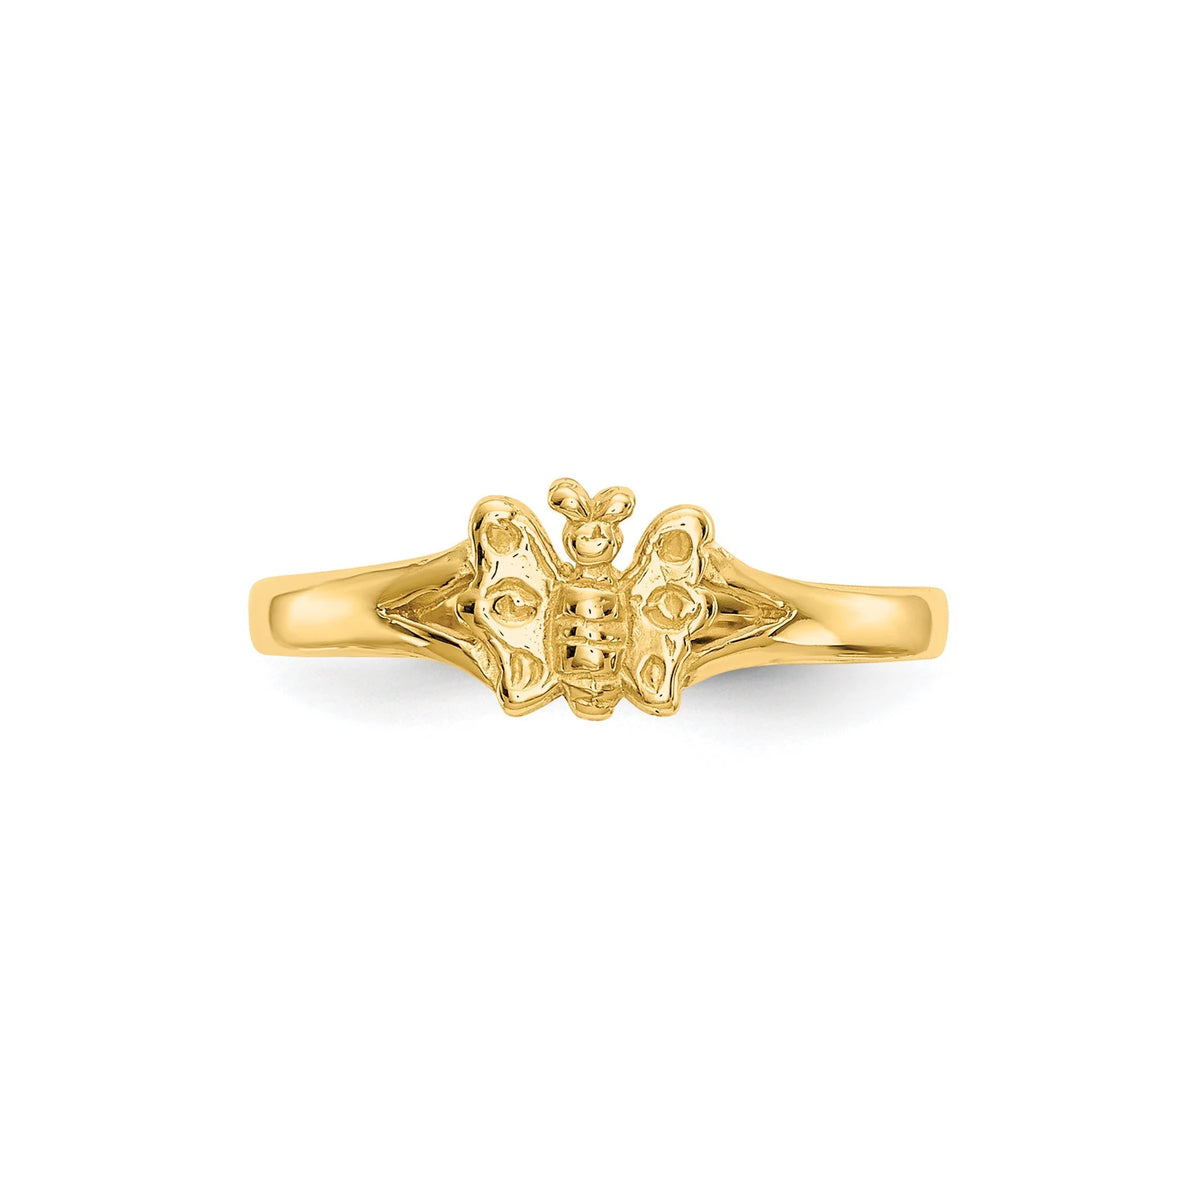 14k Yellow Gold Butterfly Ring Baby to Toddler / Band Size 1- 4 (1-5 year olds) Toddler Size Children's Ring Band